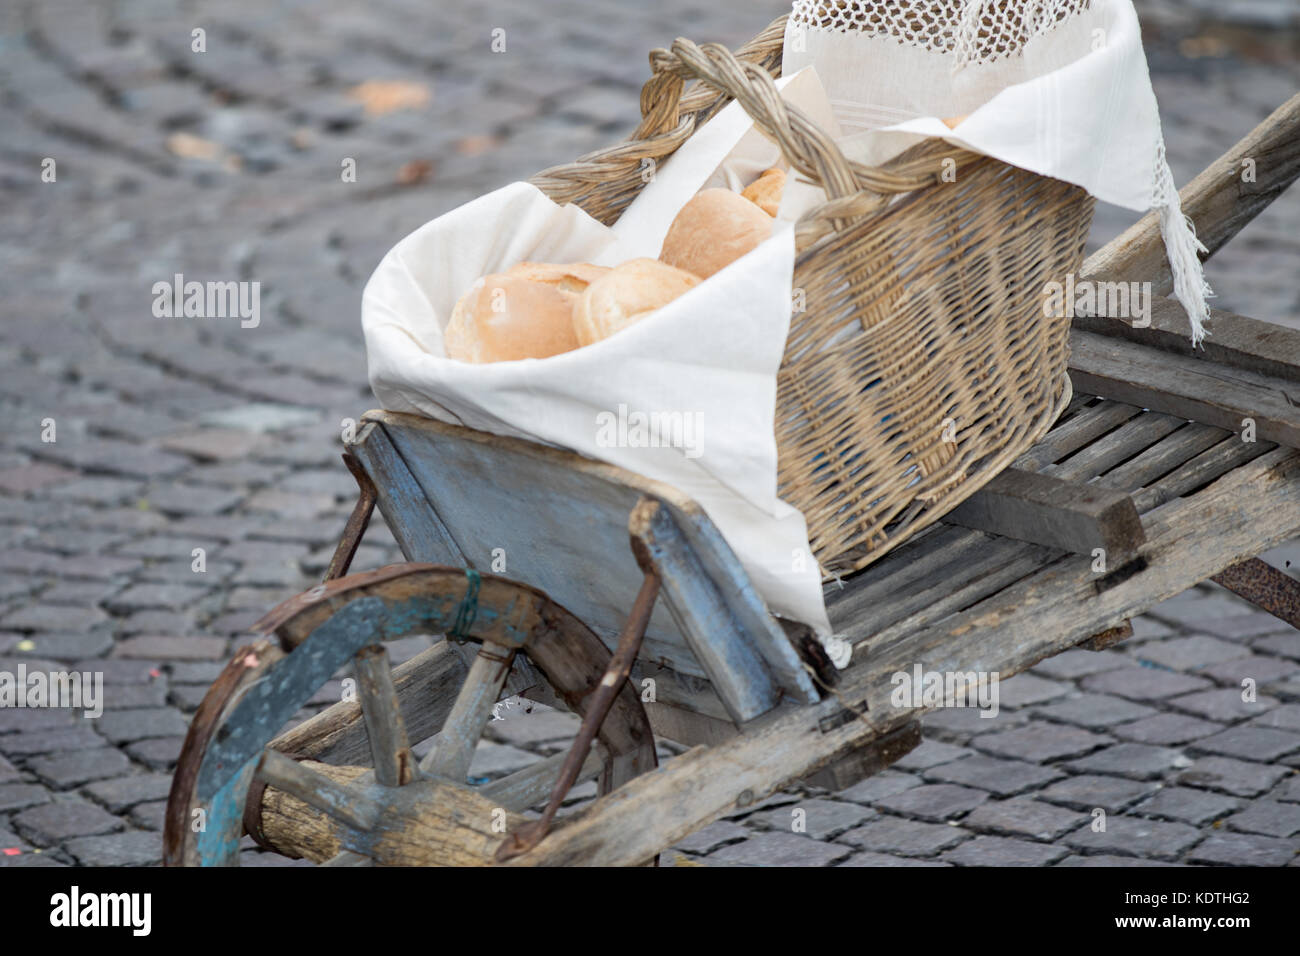 Asti, Italy - September 10, 2017: basket full of bread transported by an old wooden wheelbarrow Stock Photo